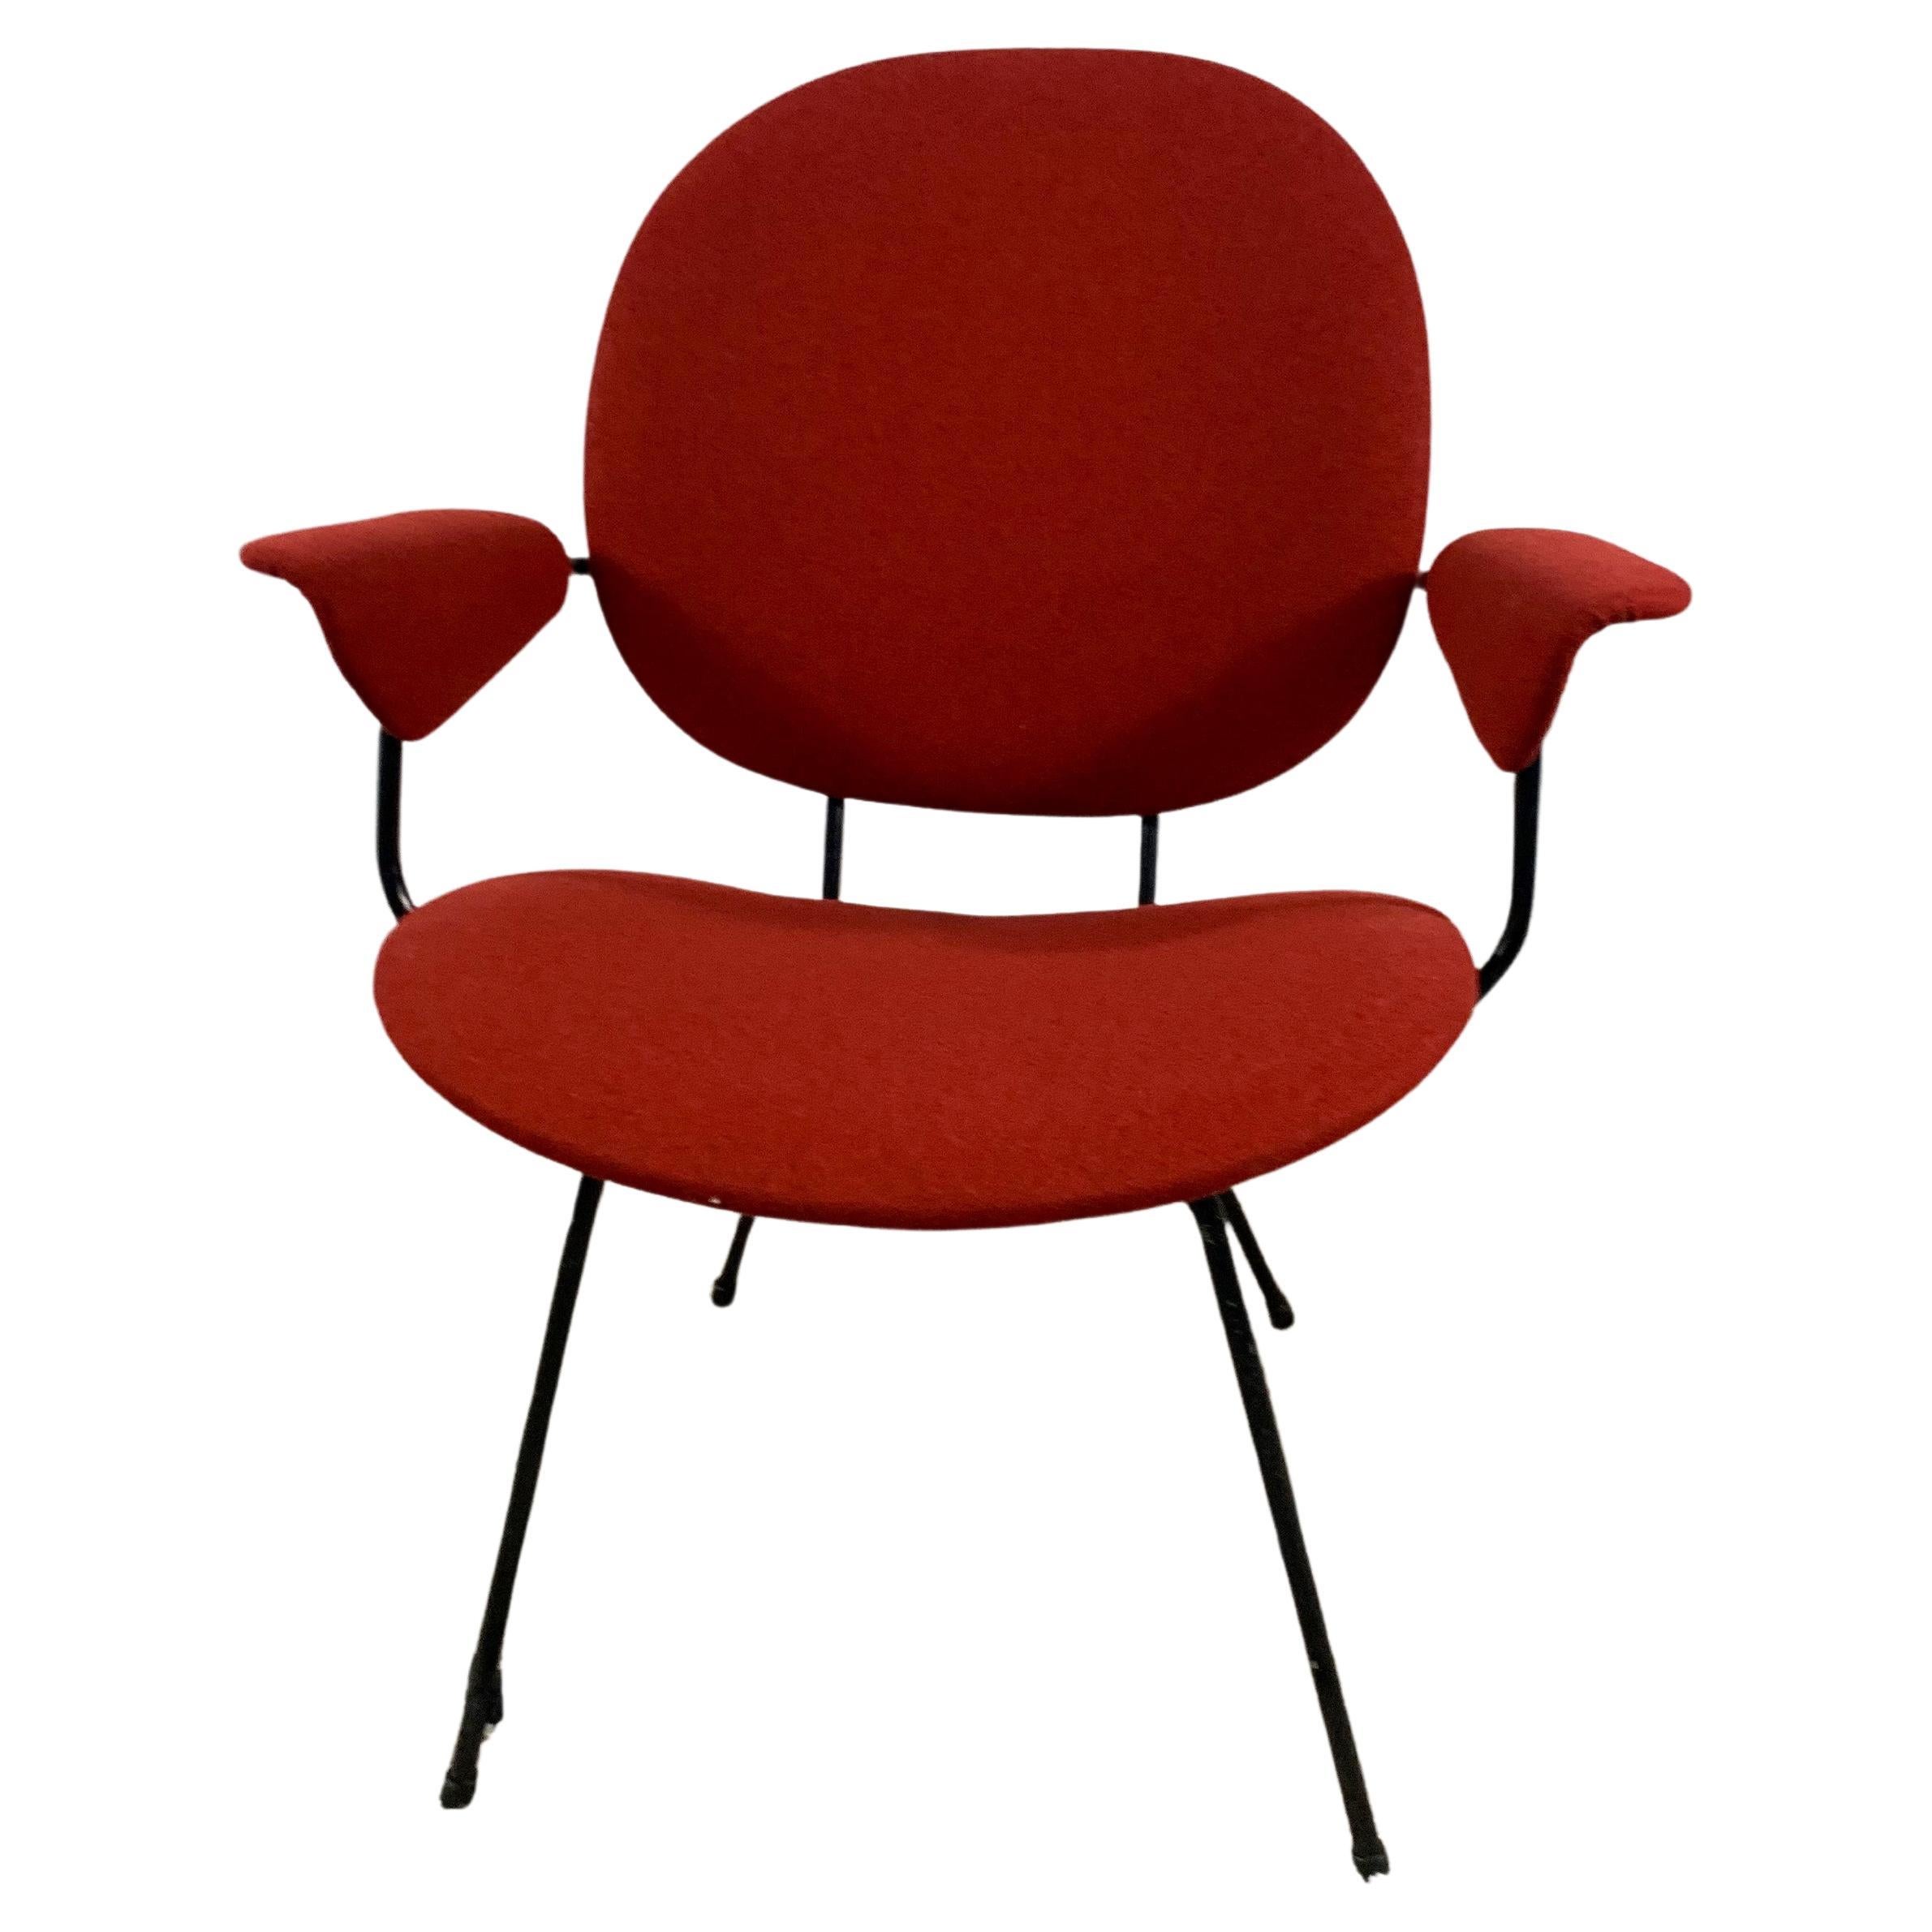 Chair Designed By W.H.Gispen For The Dutch Company Kembo For Sale